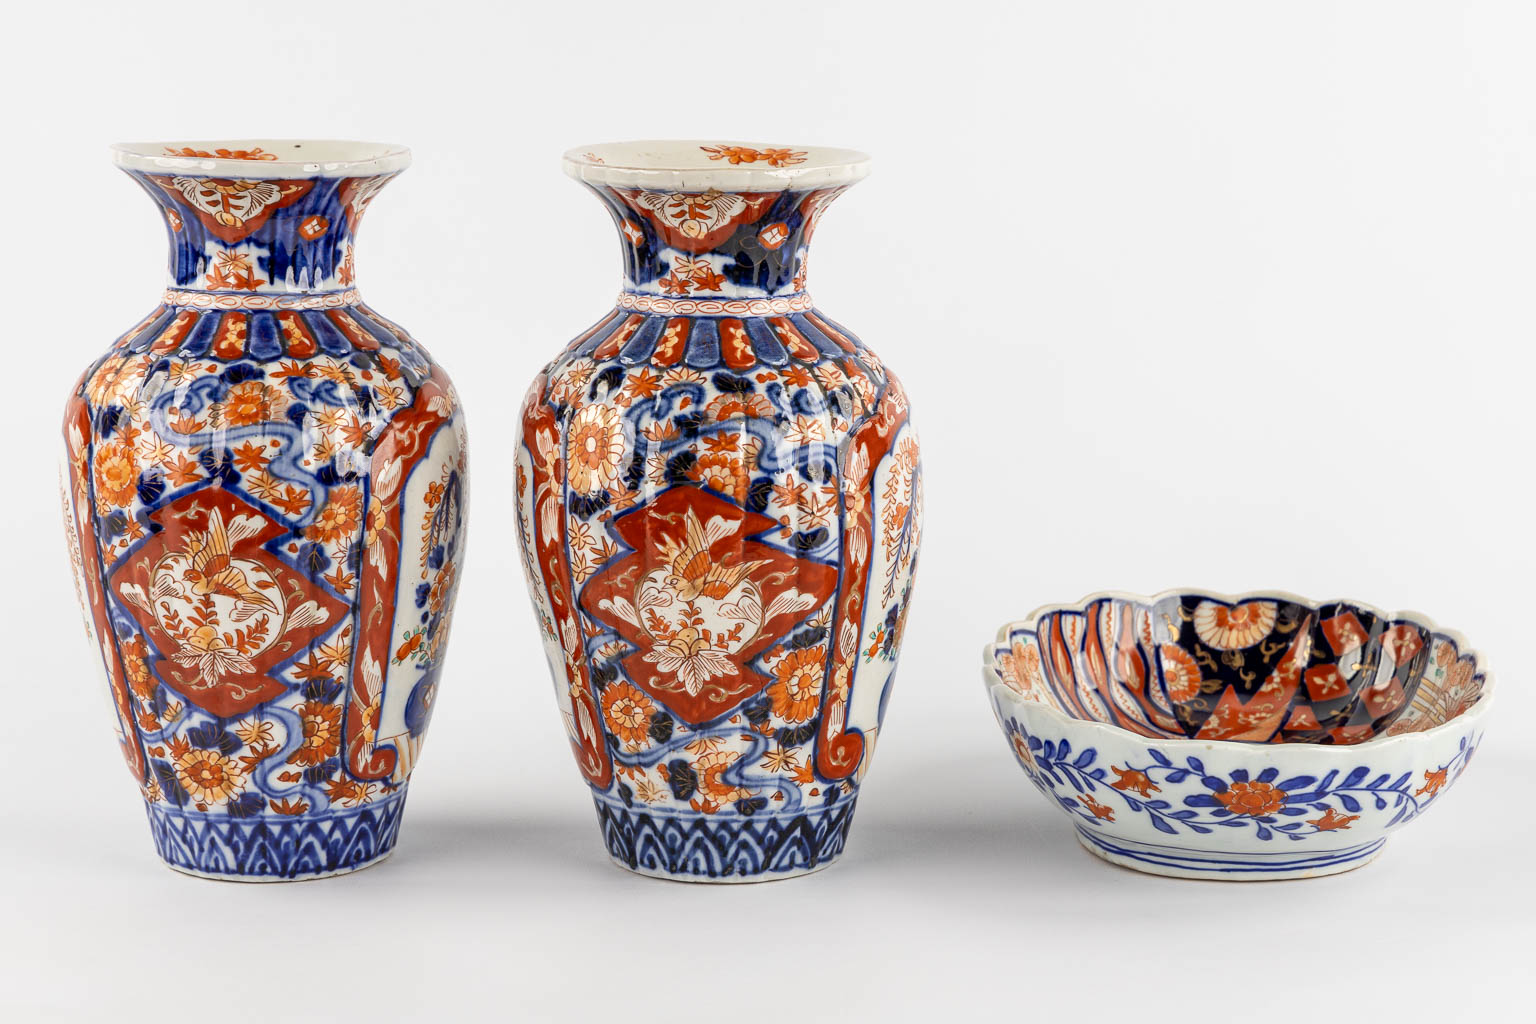 A pair of vases and a bowl, Japanese Imari porcelain. (H:25 x D:14 cm) - Image 4 of 11